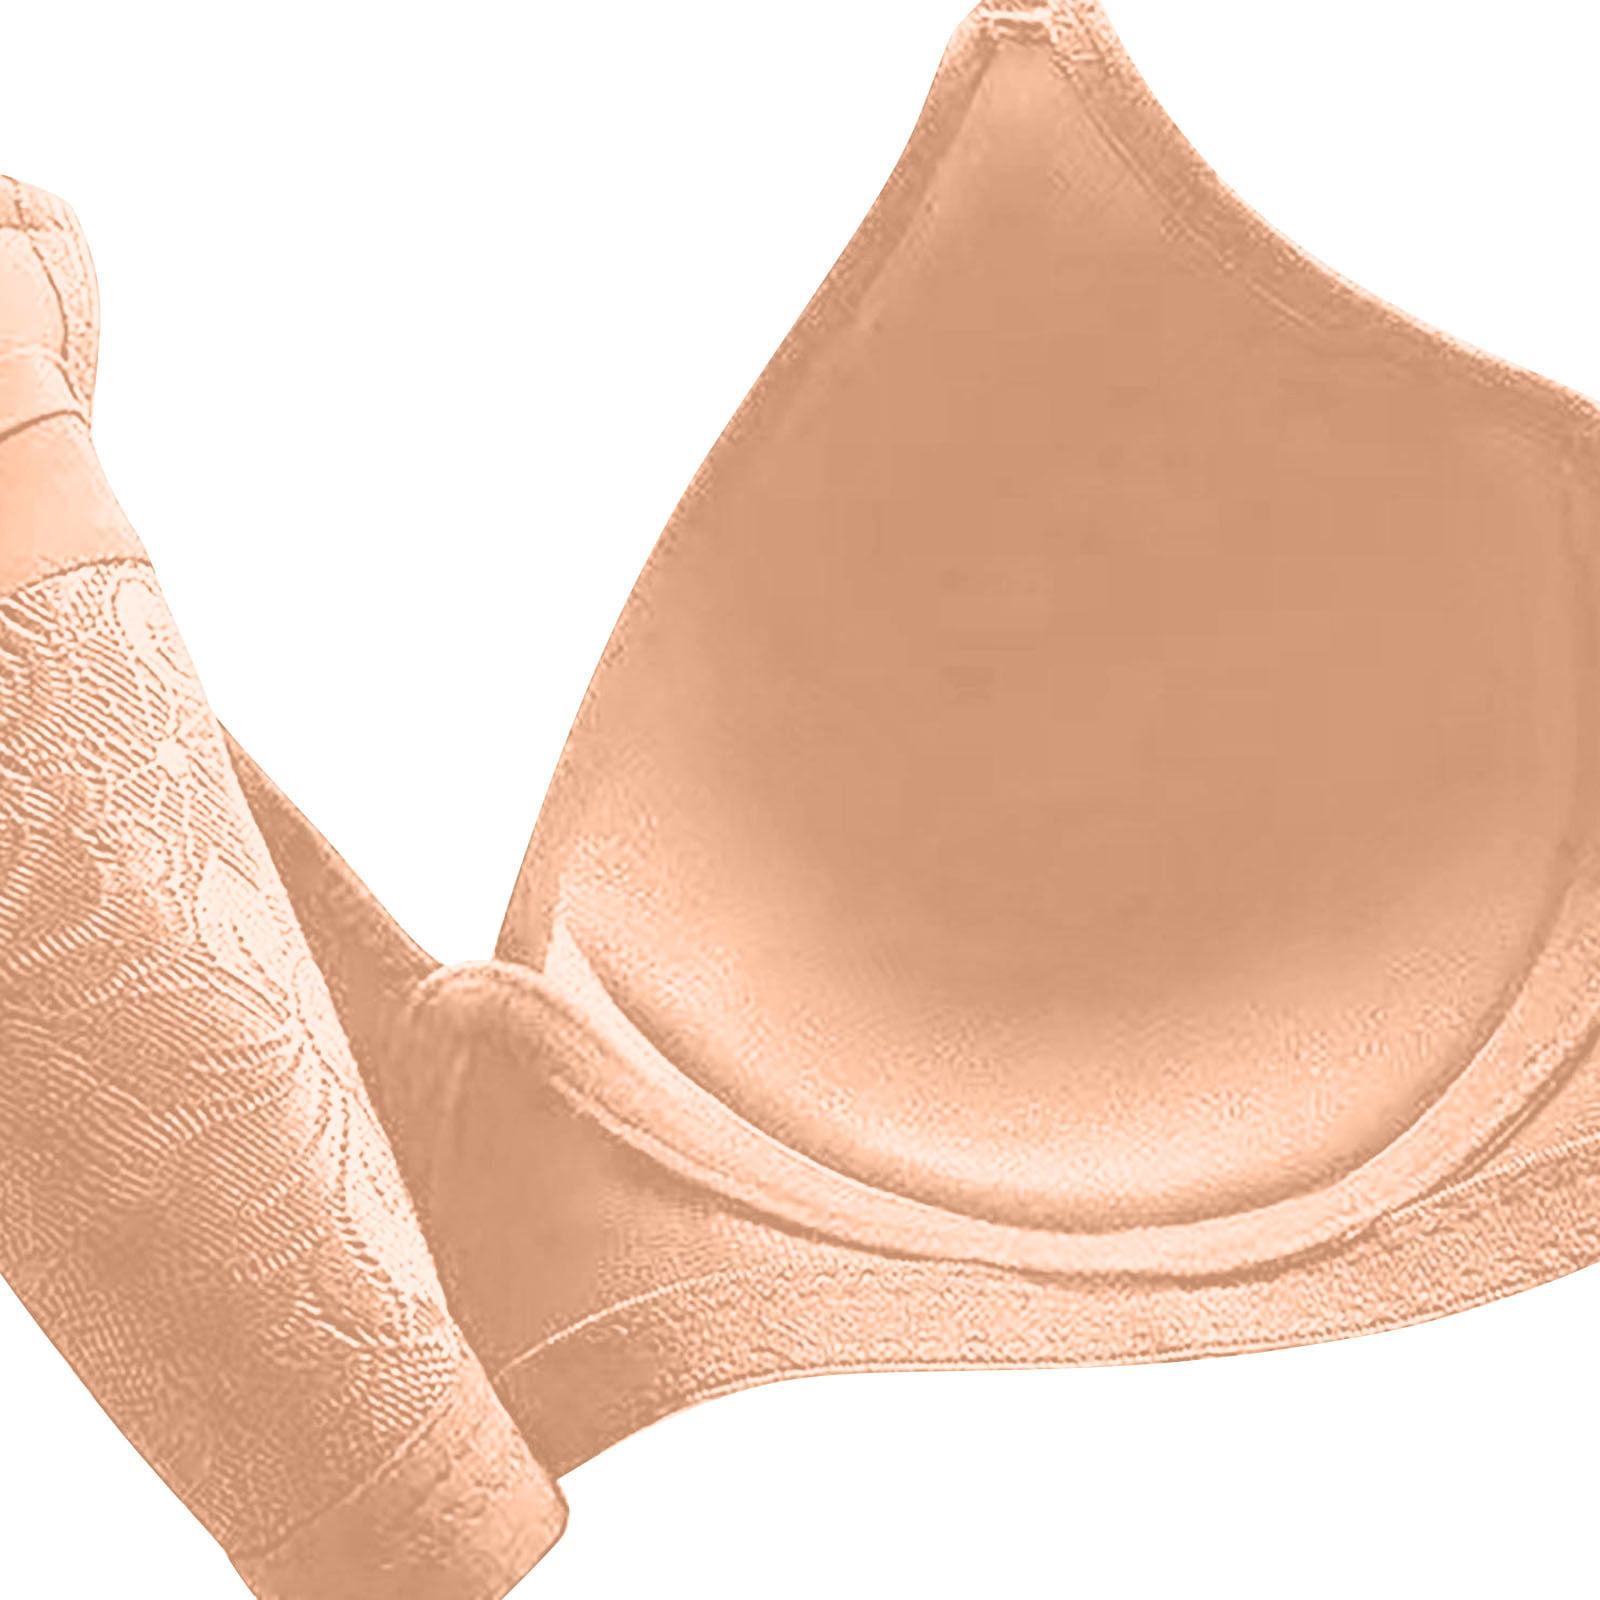 Dressberry Beige Lace Non Wired Padded Everyday Bra 8587679.htm